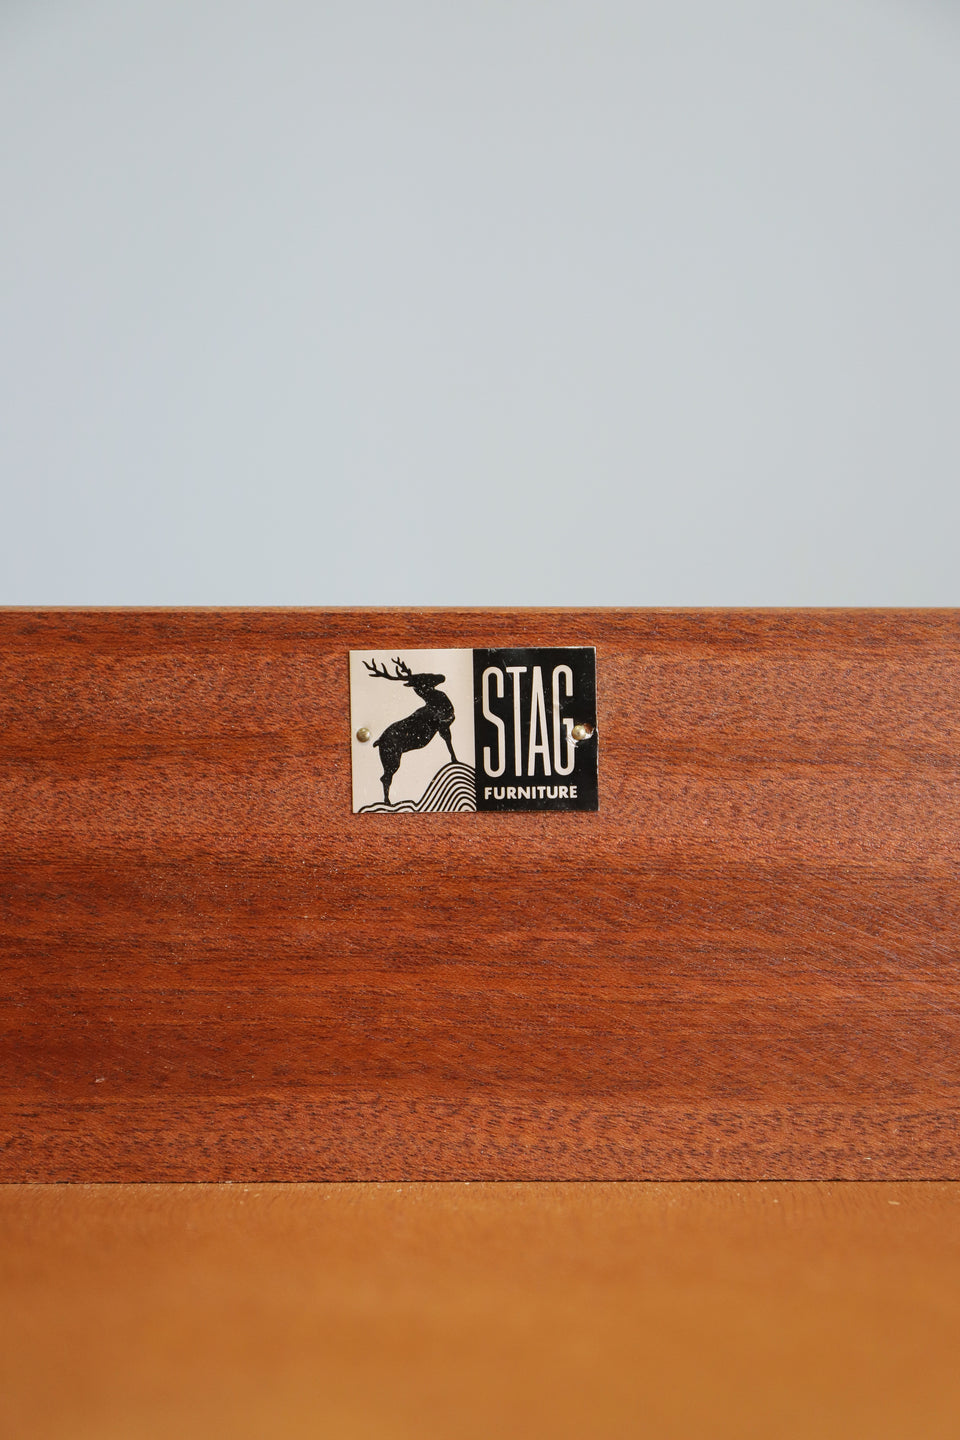 UK Vintage STAG Furniture Chest/イギリスヴィンテージ スタッグ チェスト 収納家具